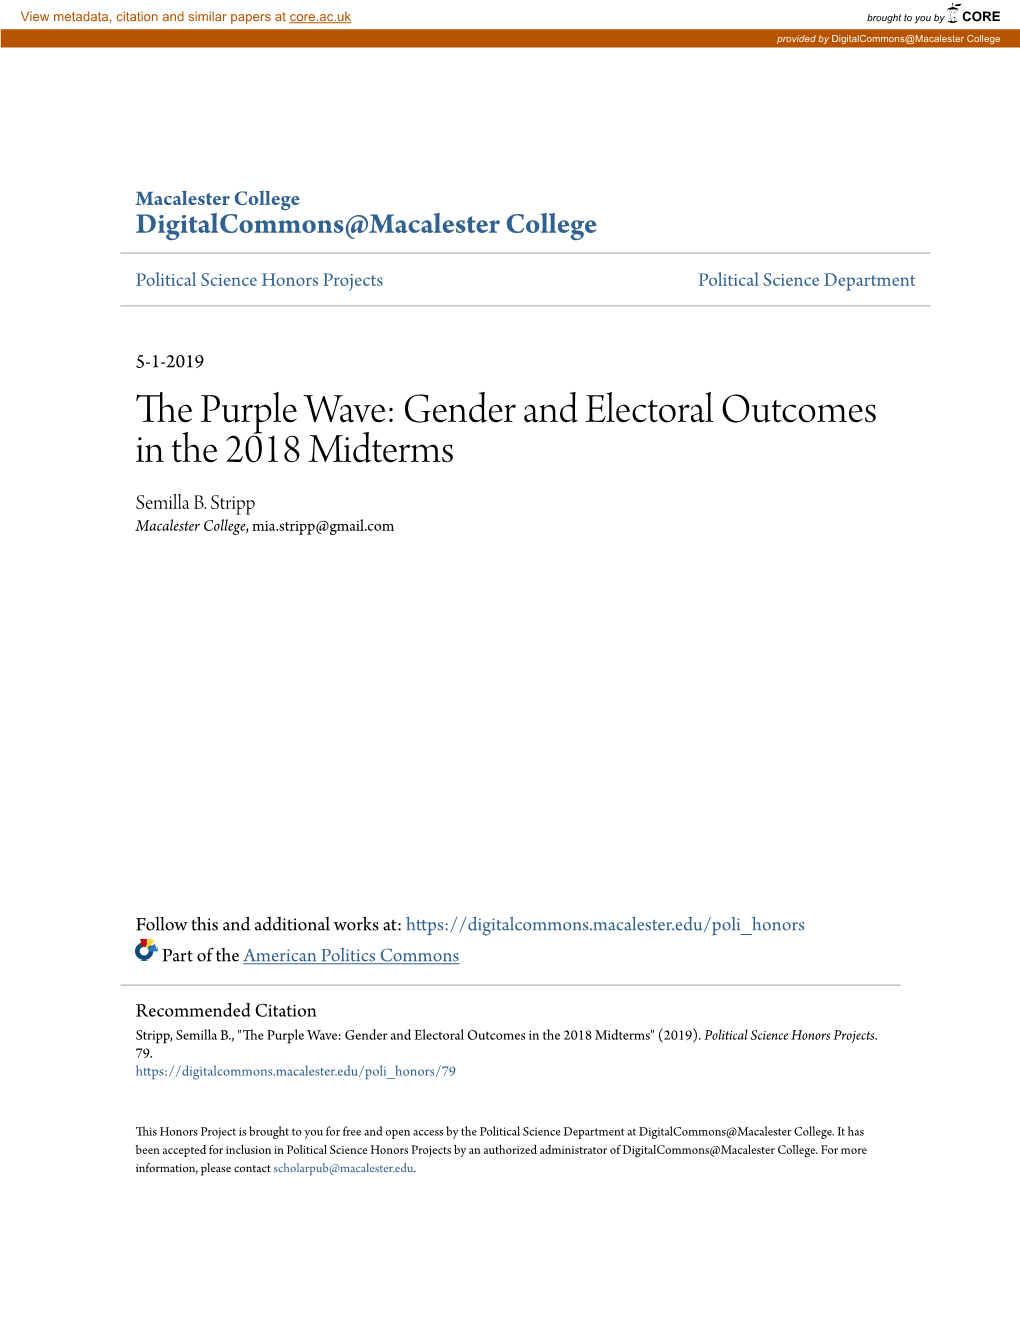 The Purple Wave: Gender and Electoral Outcomes in the 2018 Midterms Semilla B